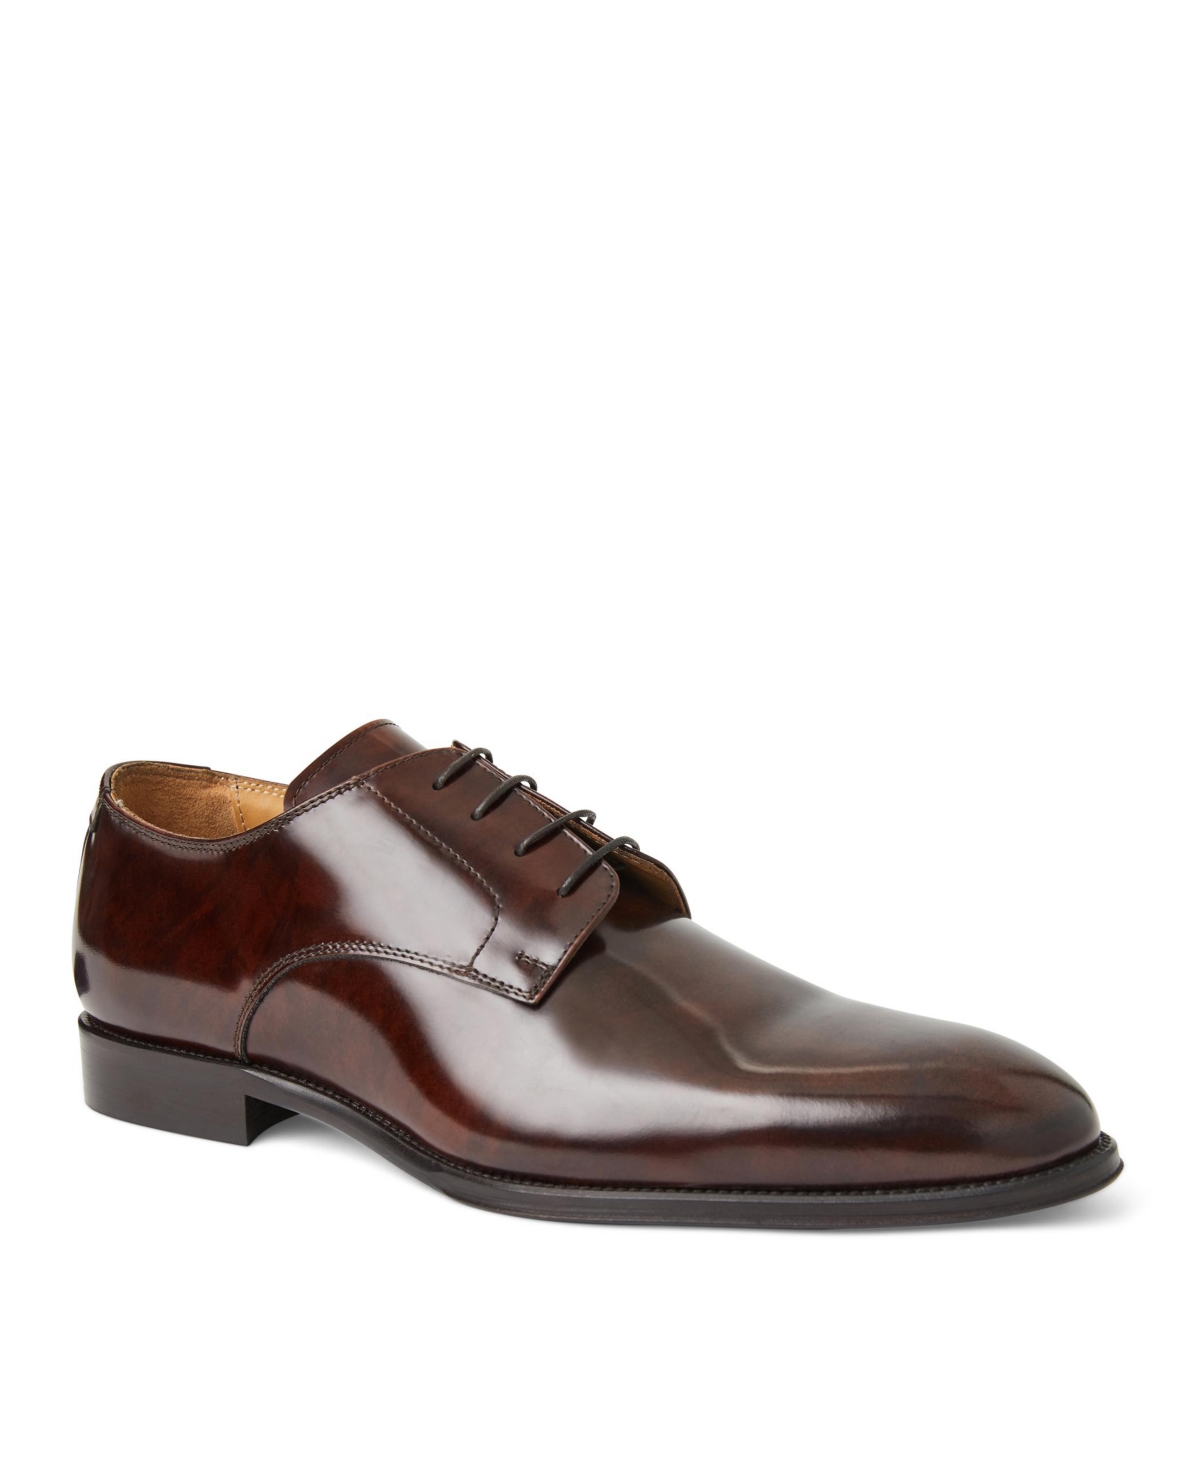 Bruno Magli Men's Asti Lace-Up Shoes - Brown